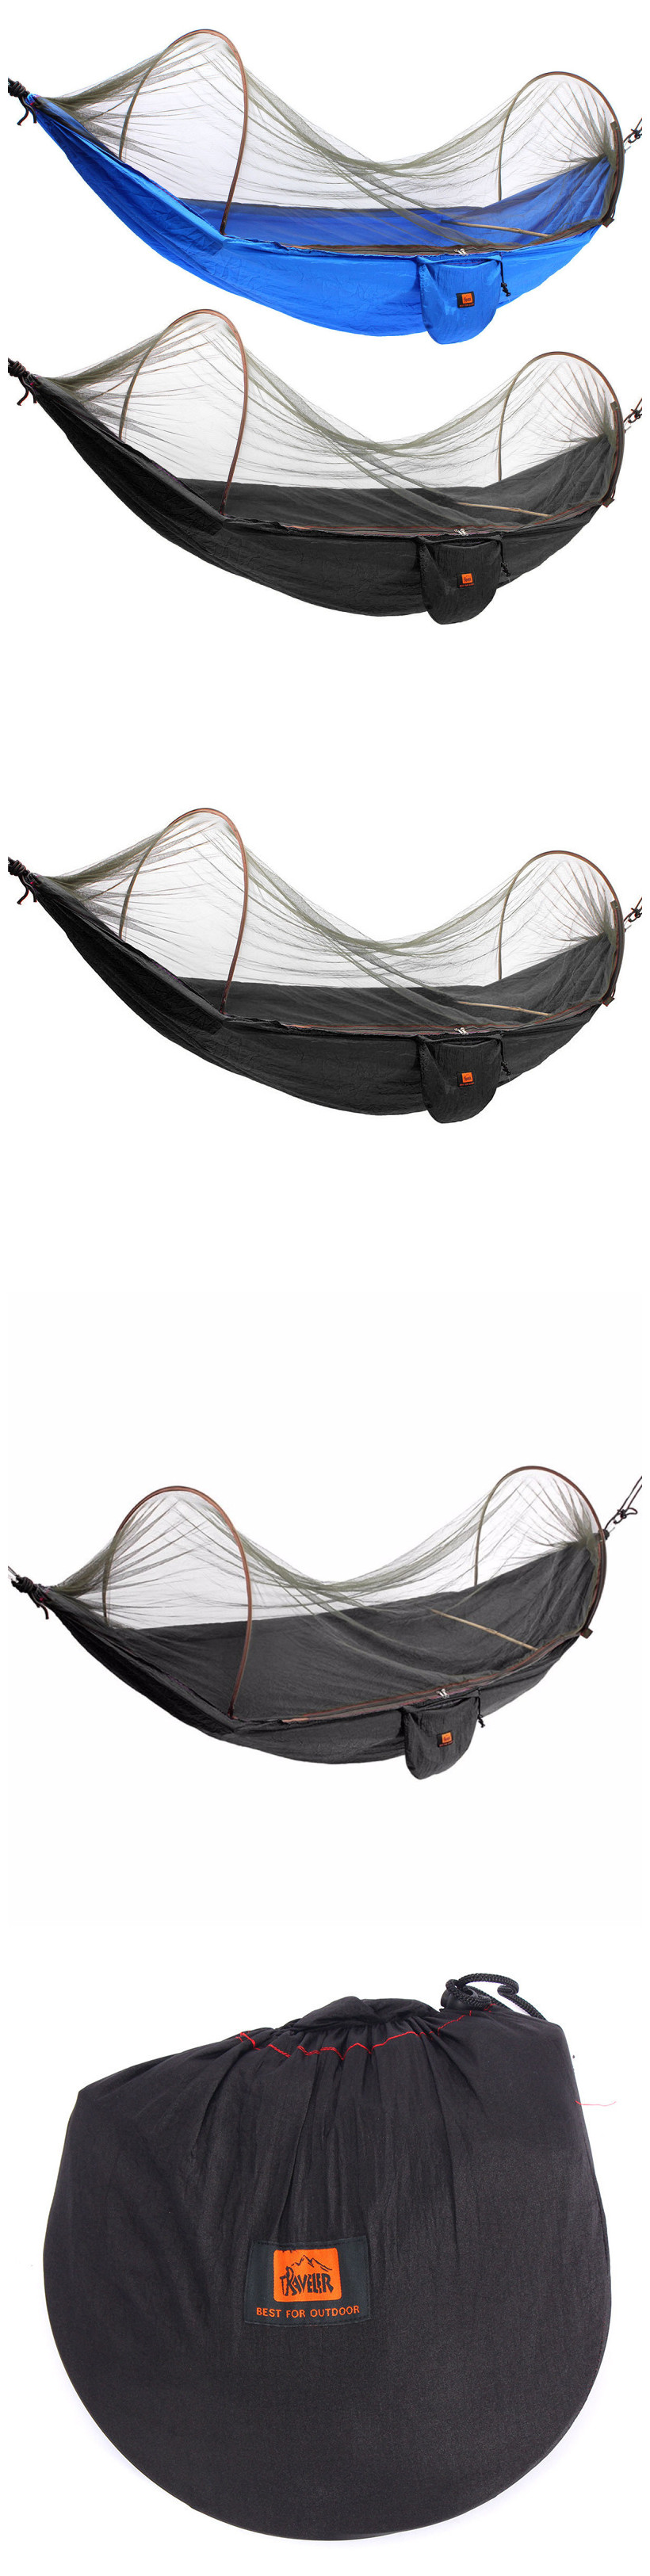 Outdoor-Portable-Camping-Parachute-Hammock-Hanging-Swing-Bed-With-Mosquito-Net-1093863-1